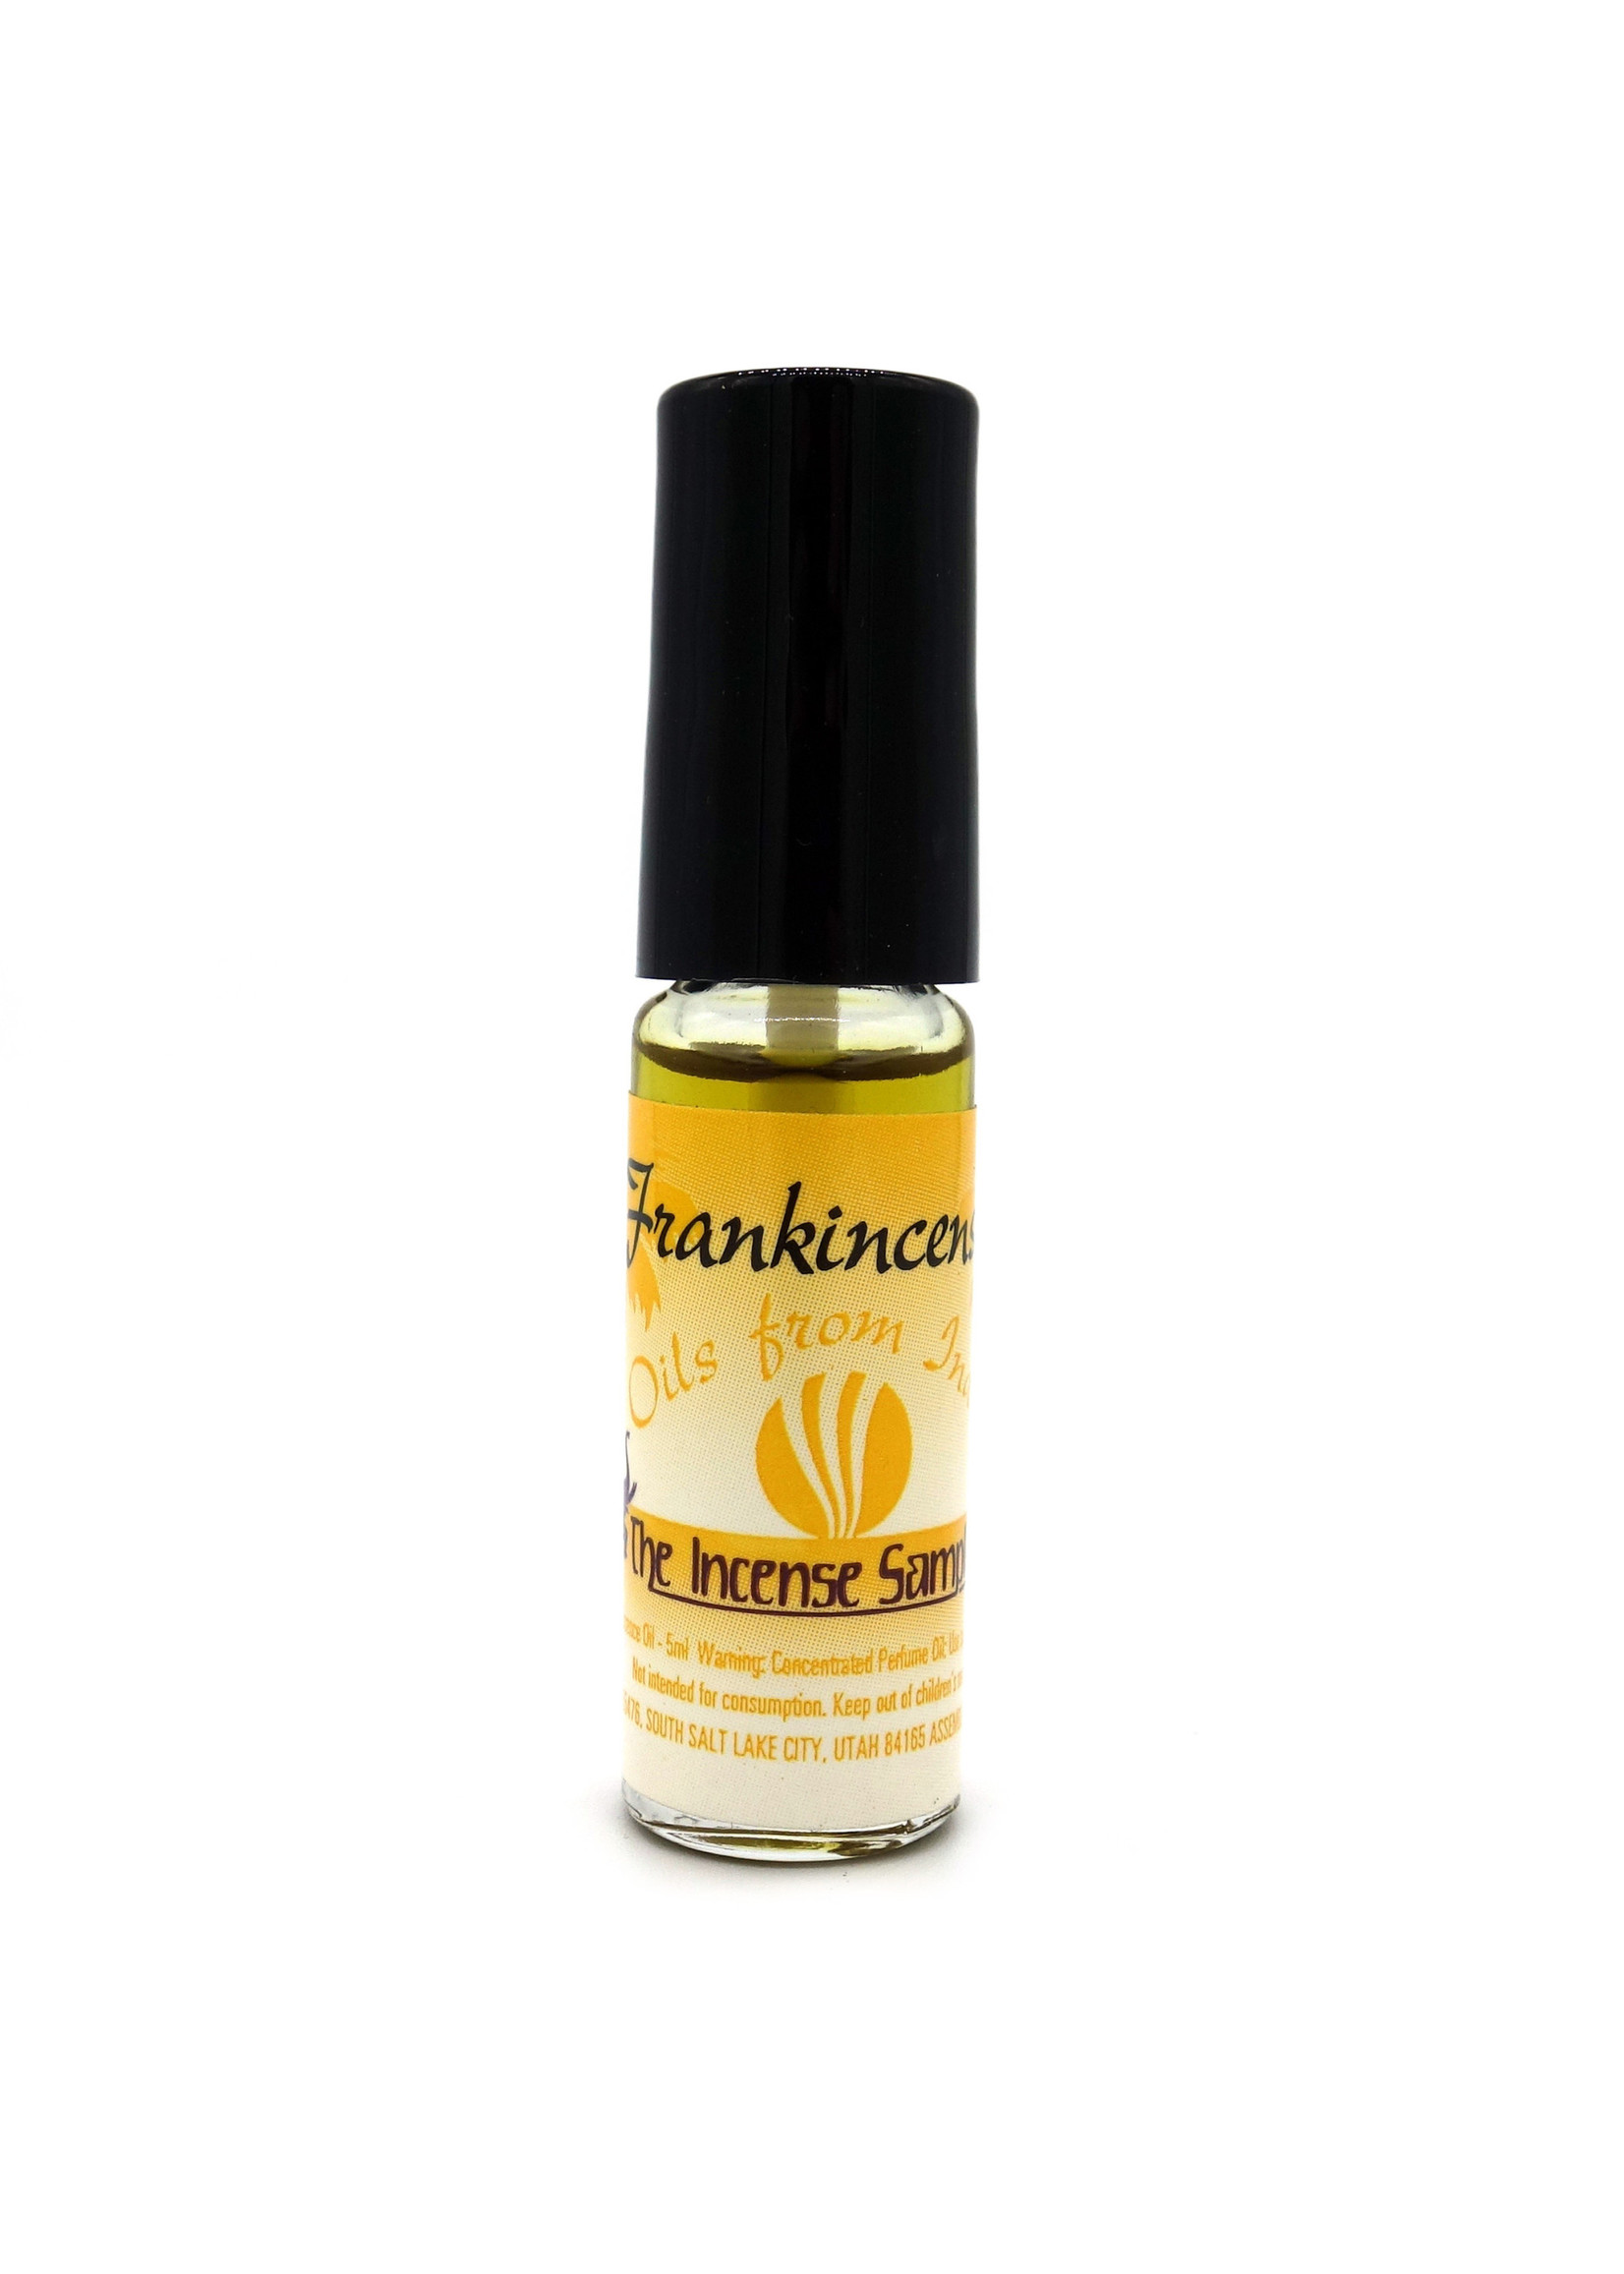 Oils From India Frankincense Perfume Oil 9.5ml